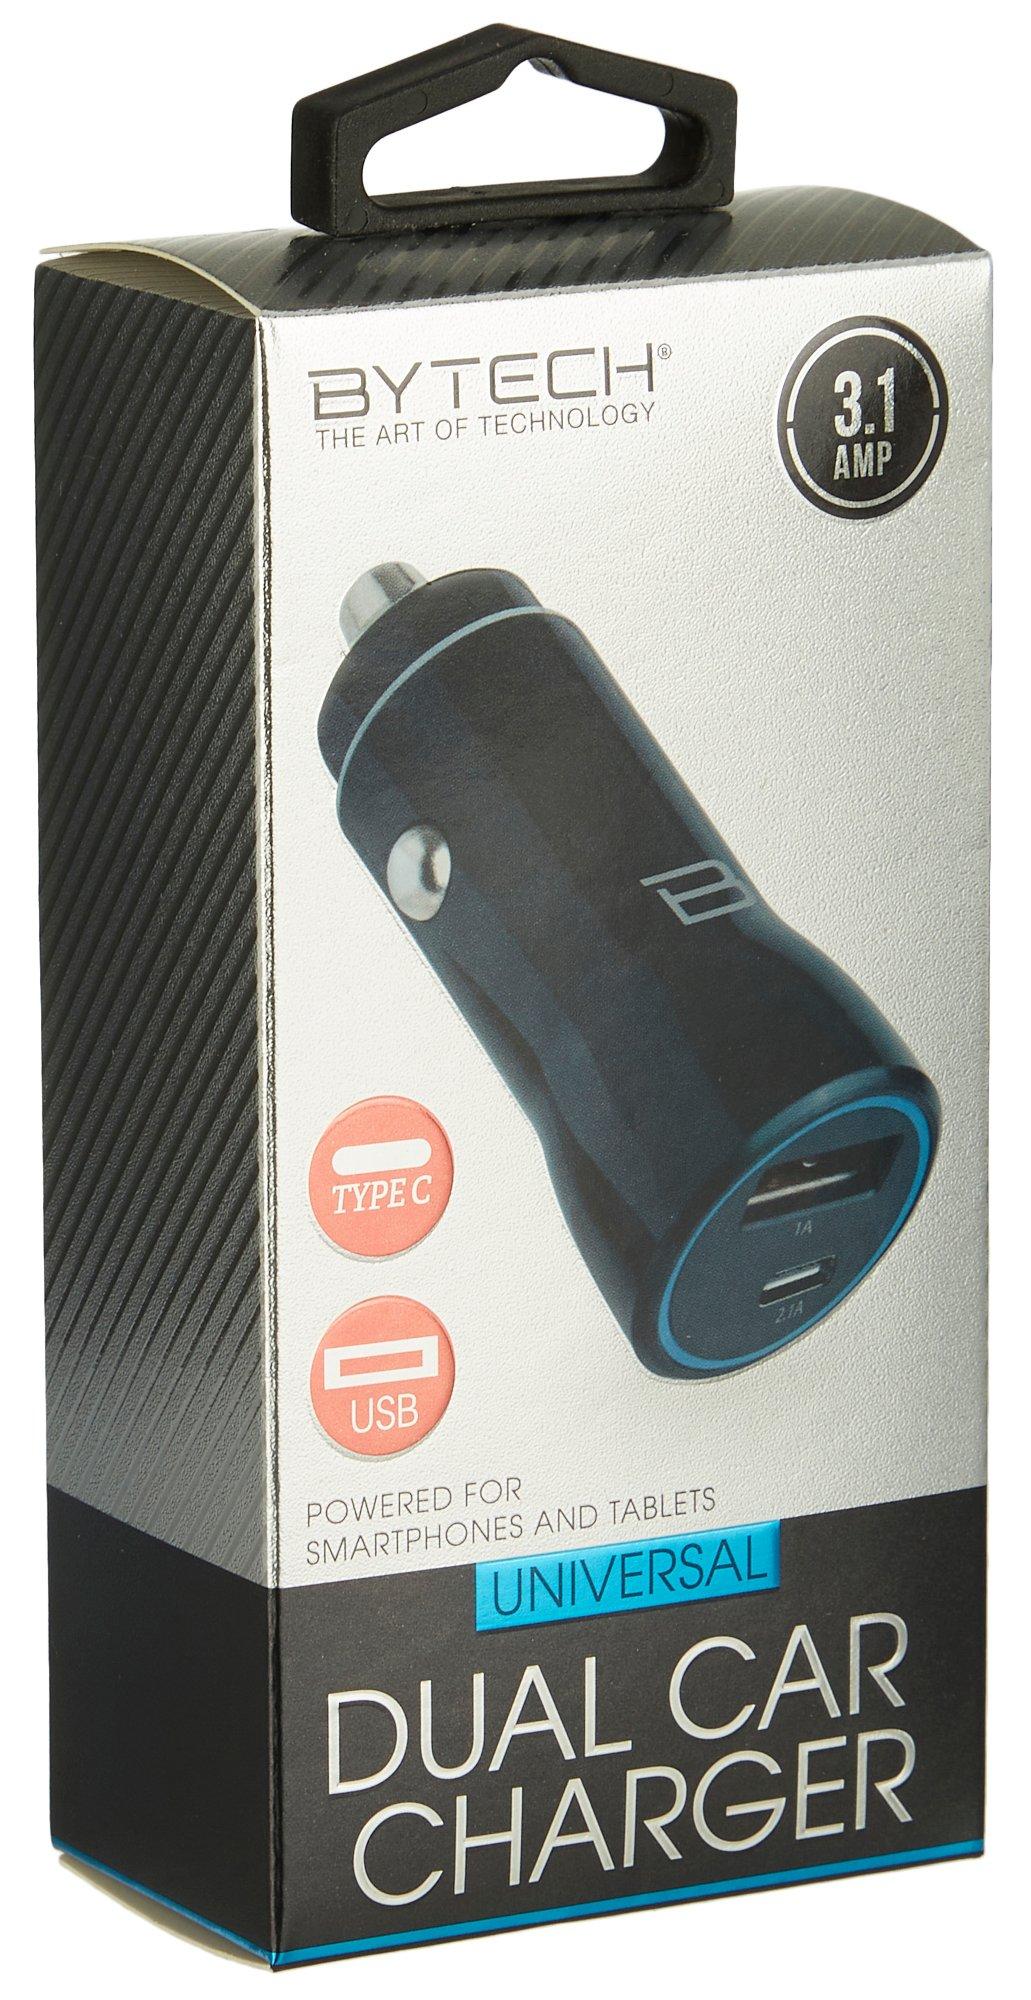 Classic Universal Dual Car Charger